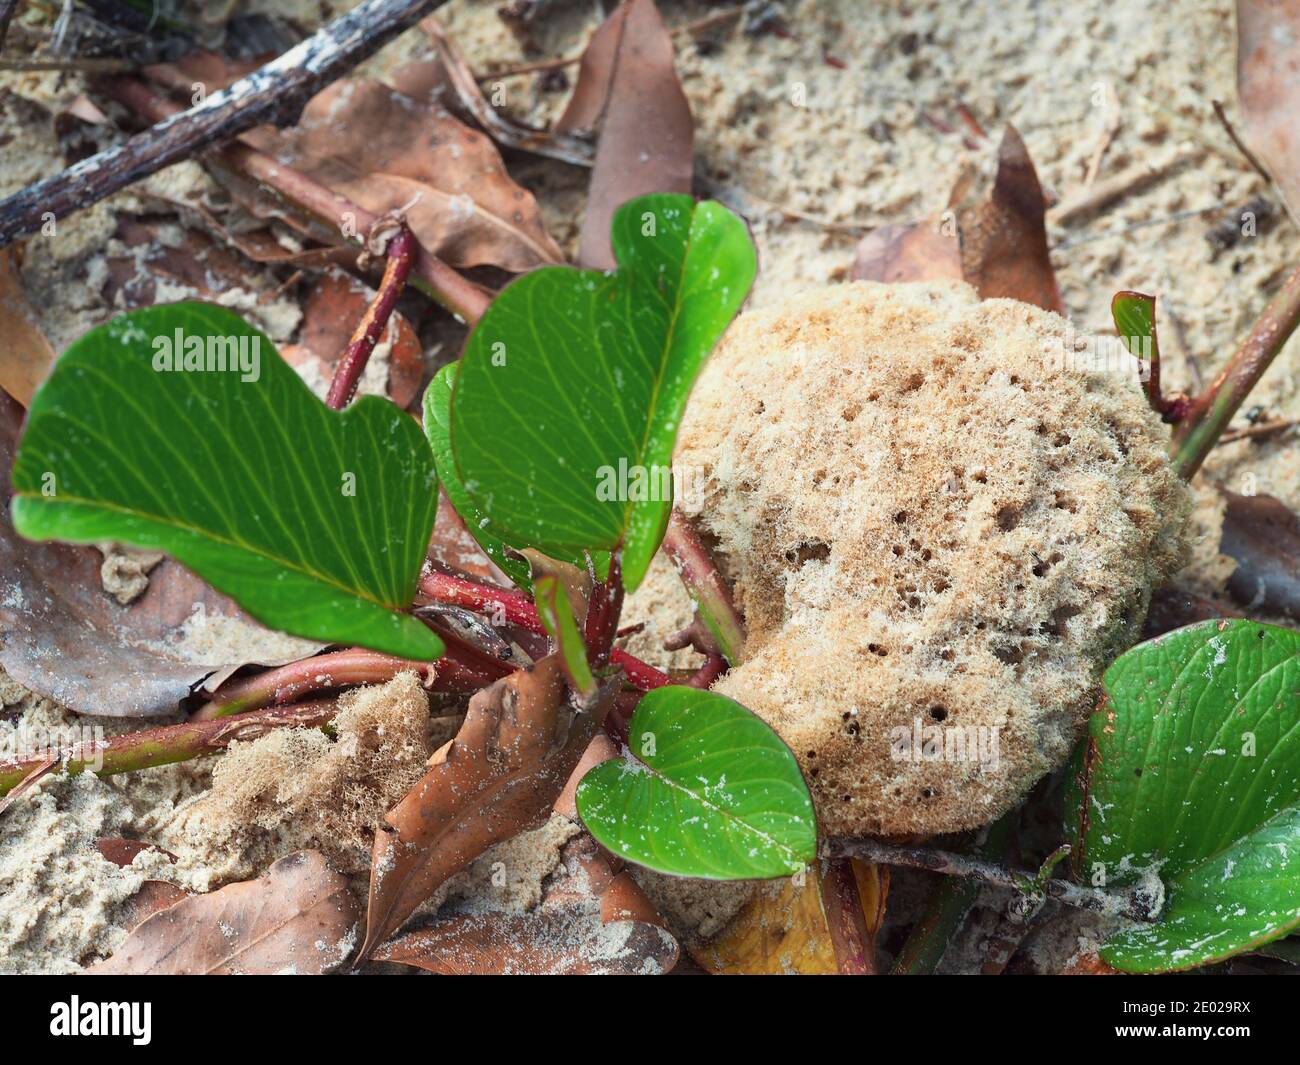 A sand encrusted sea sponge that has washed up on the sandy beach near some bright green red stemmed Morning Glory Vine leaves, Australia Stock Photo